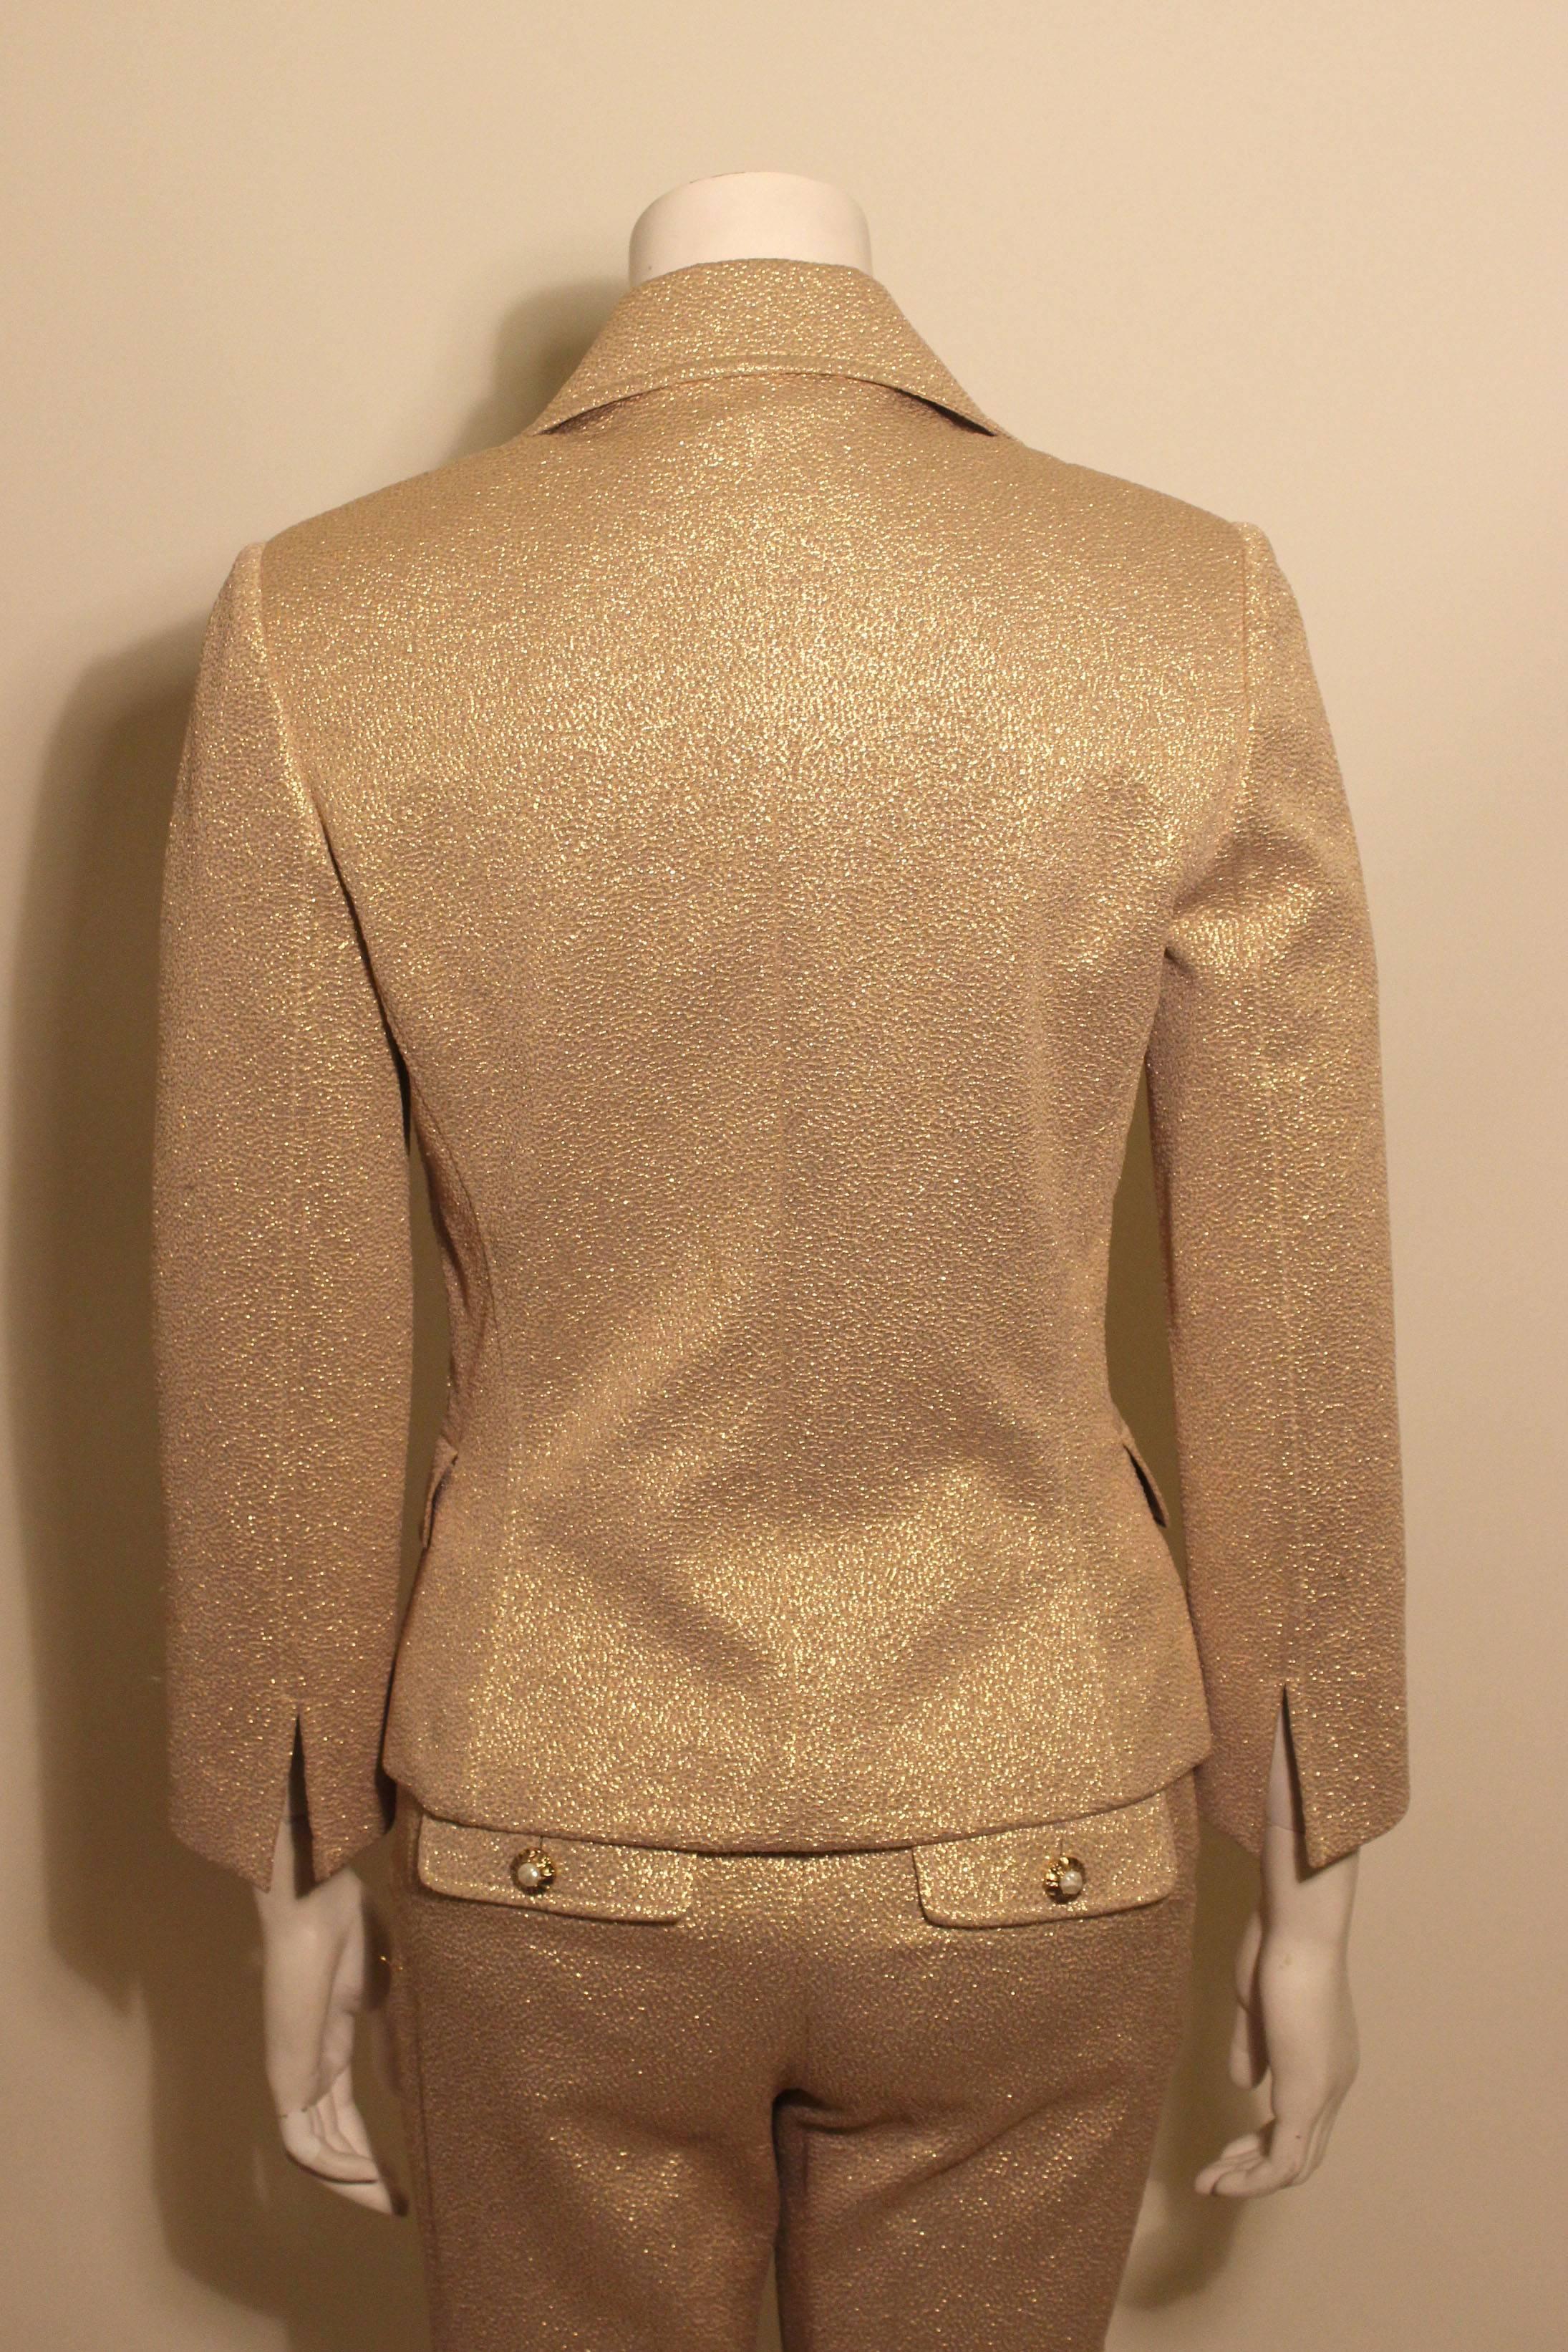 Dolce & Gabbana Metallic Gold Pant Suit For Sale 2